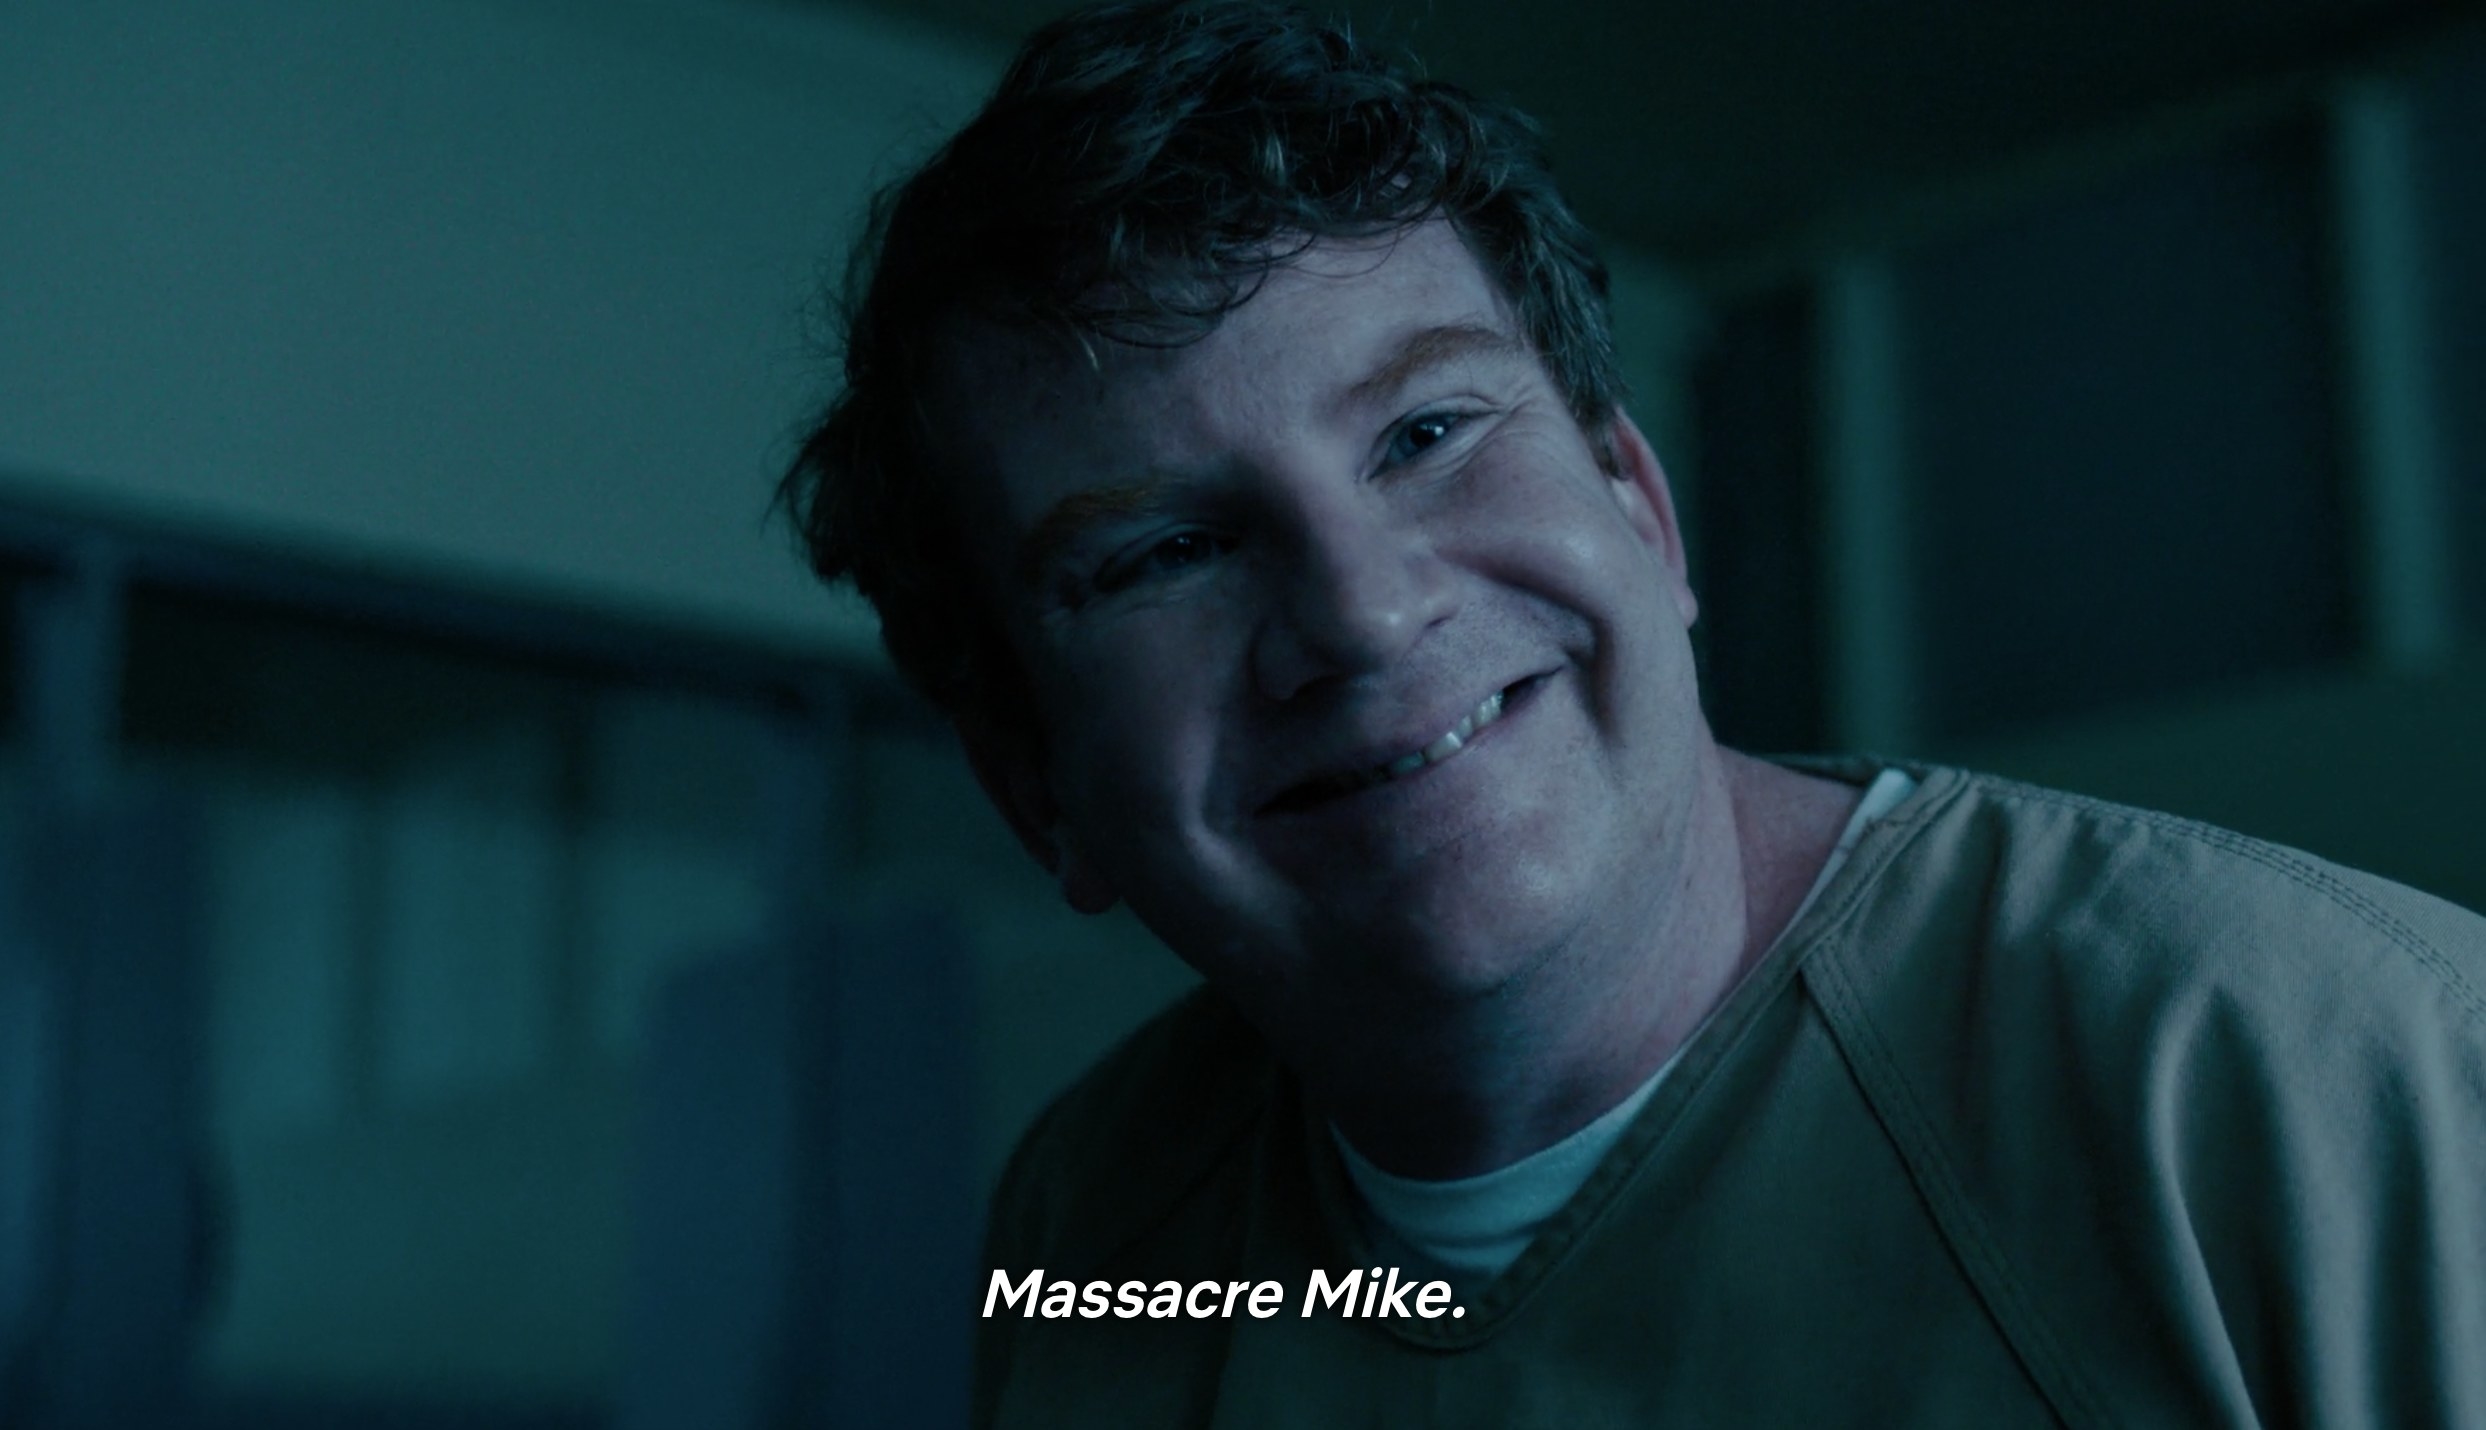 An eerie looking male prisoner named Massacre Mike smiles with his head tilted